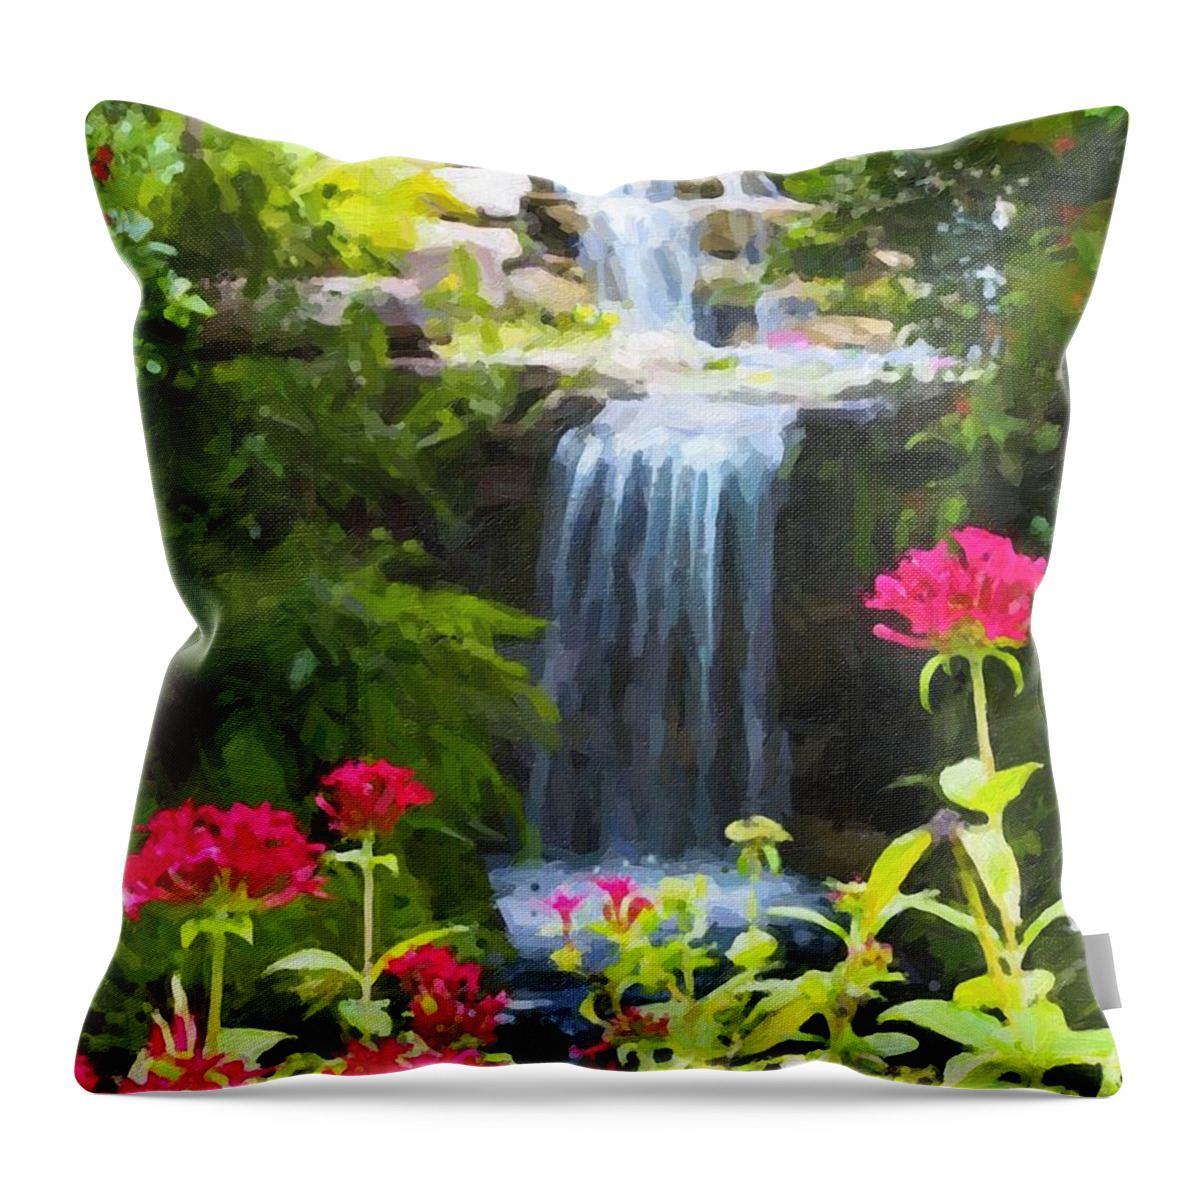 Waterfall Throw Pillow featuring the painting The Falls by Tammy Lee Bradley